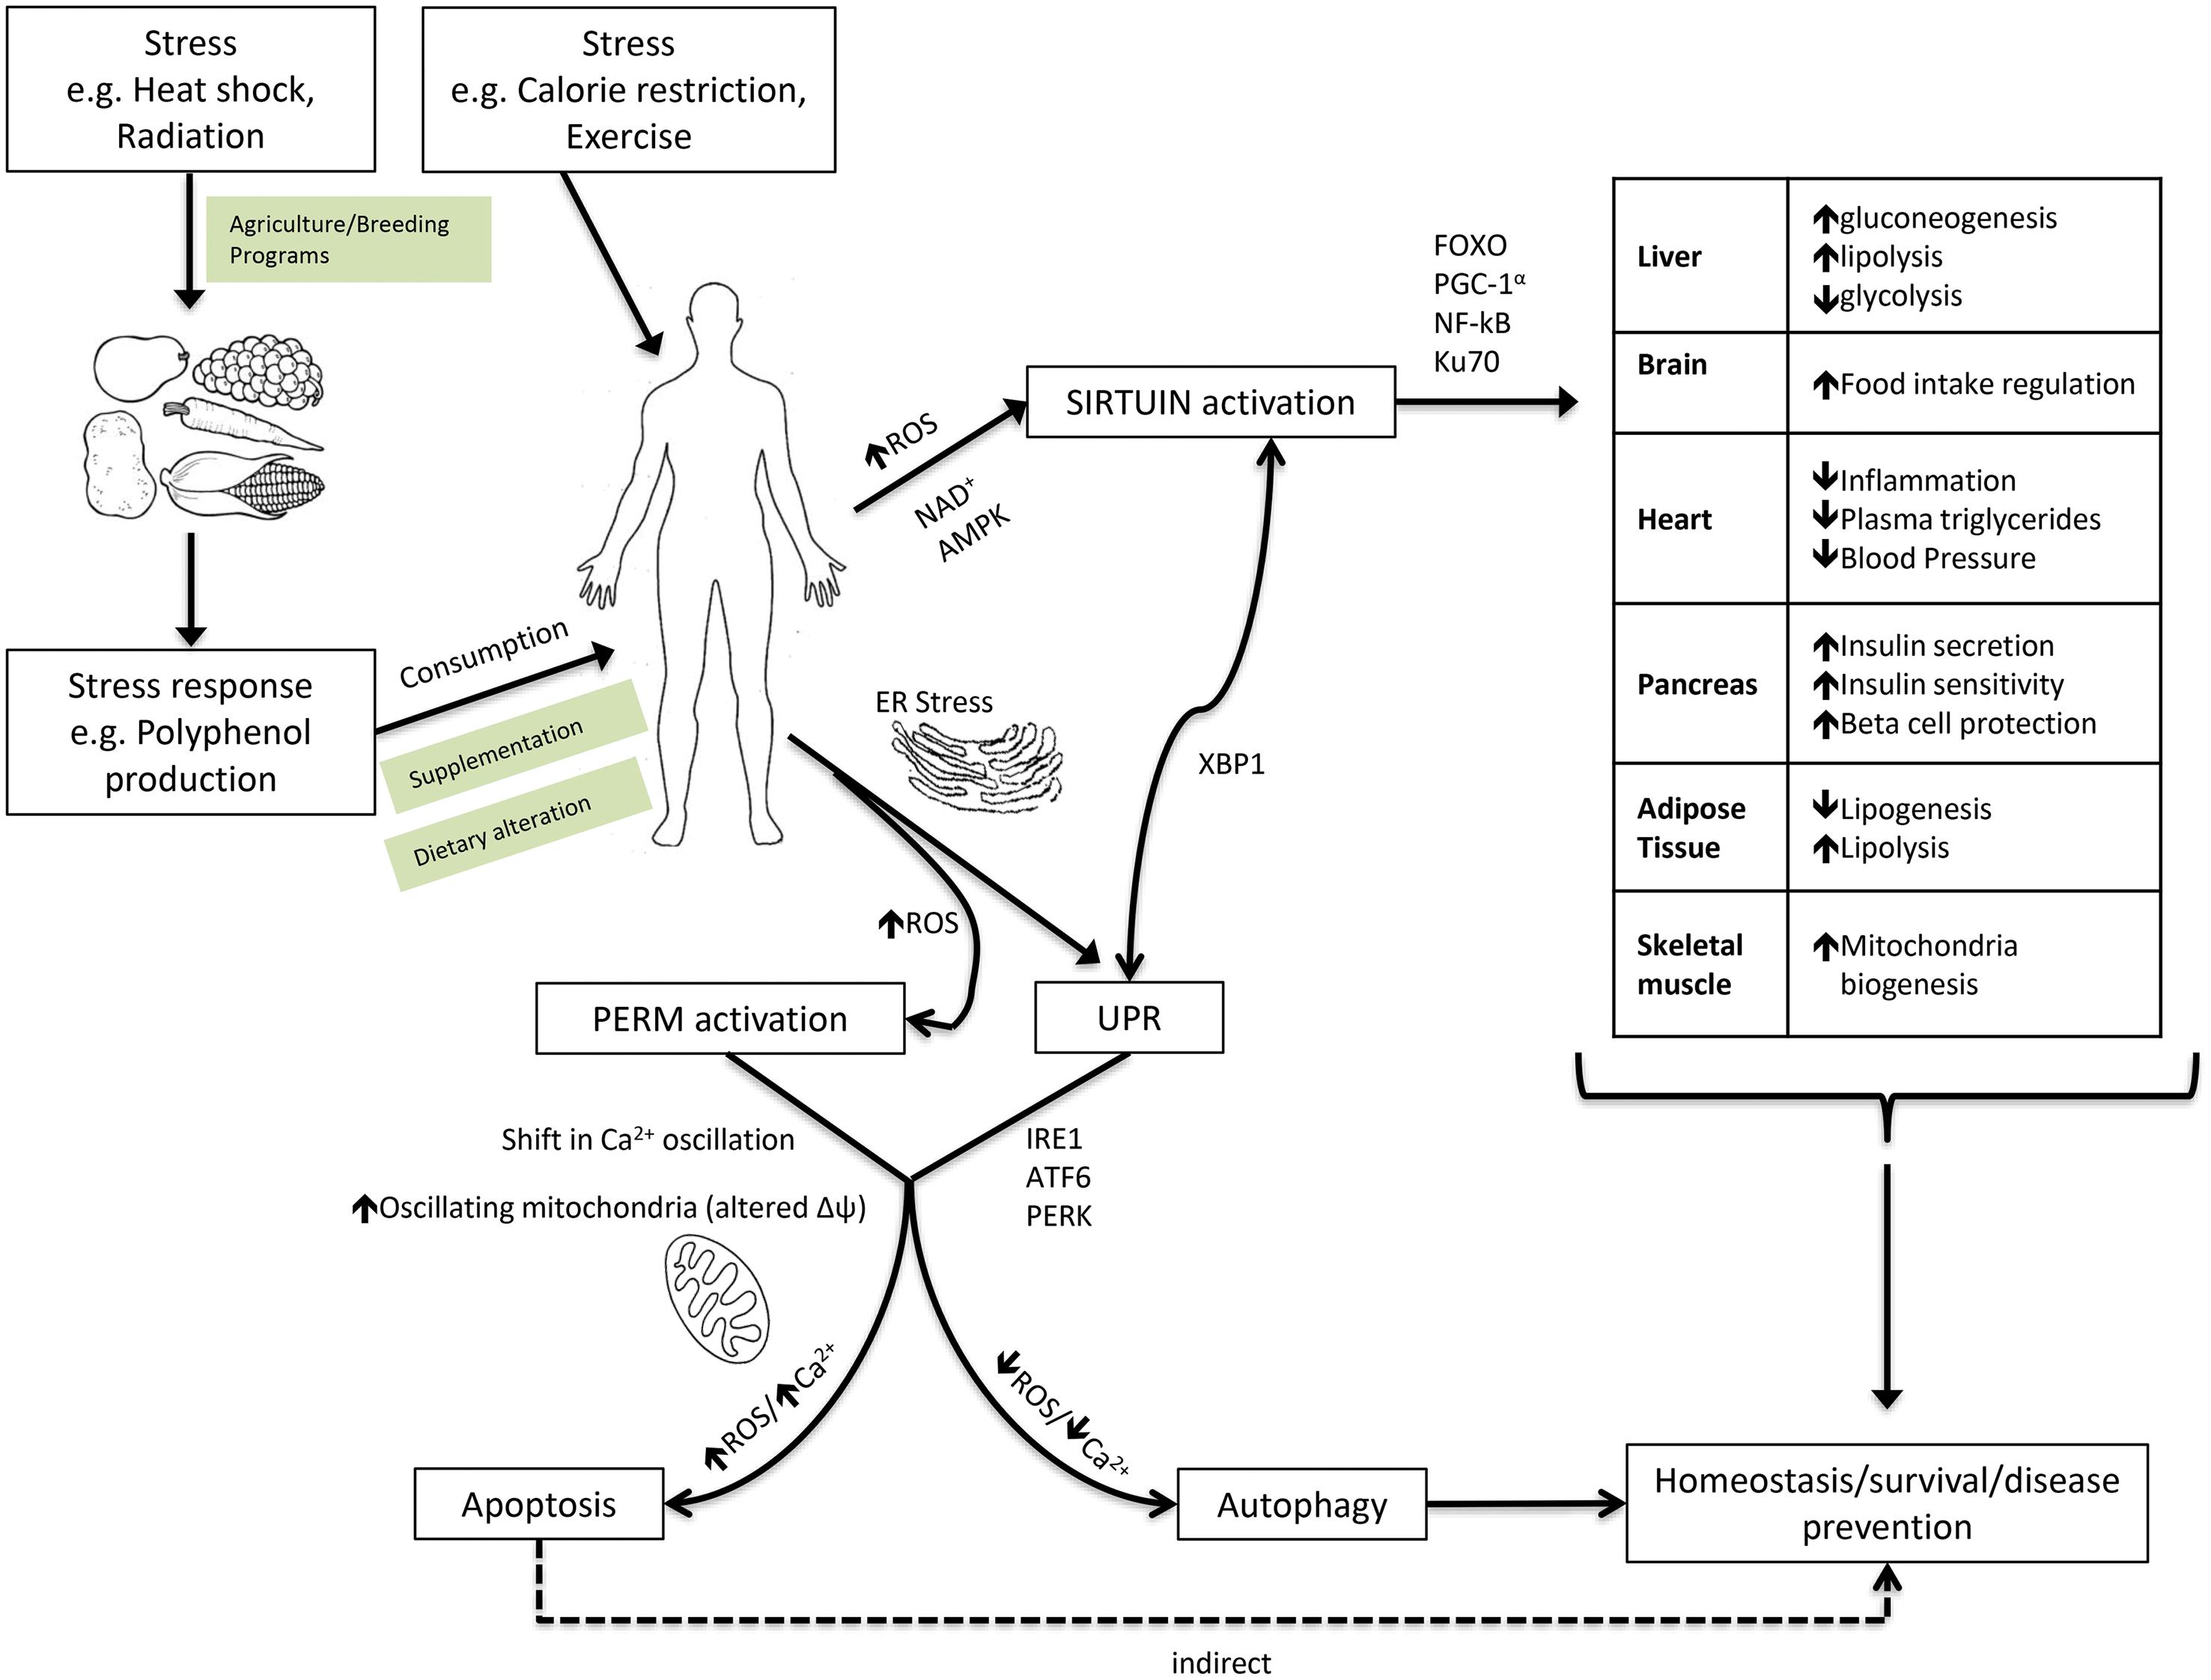 Mechanism of xenohormesis from plant stress to SIRT1 activation and cellular homeostasis.